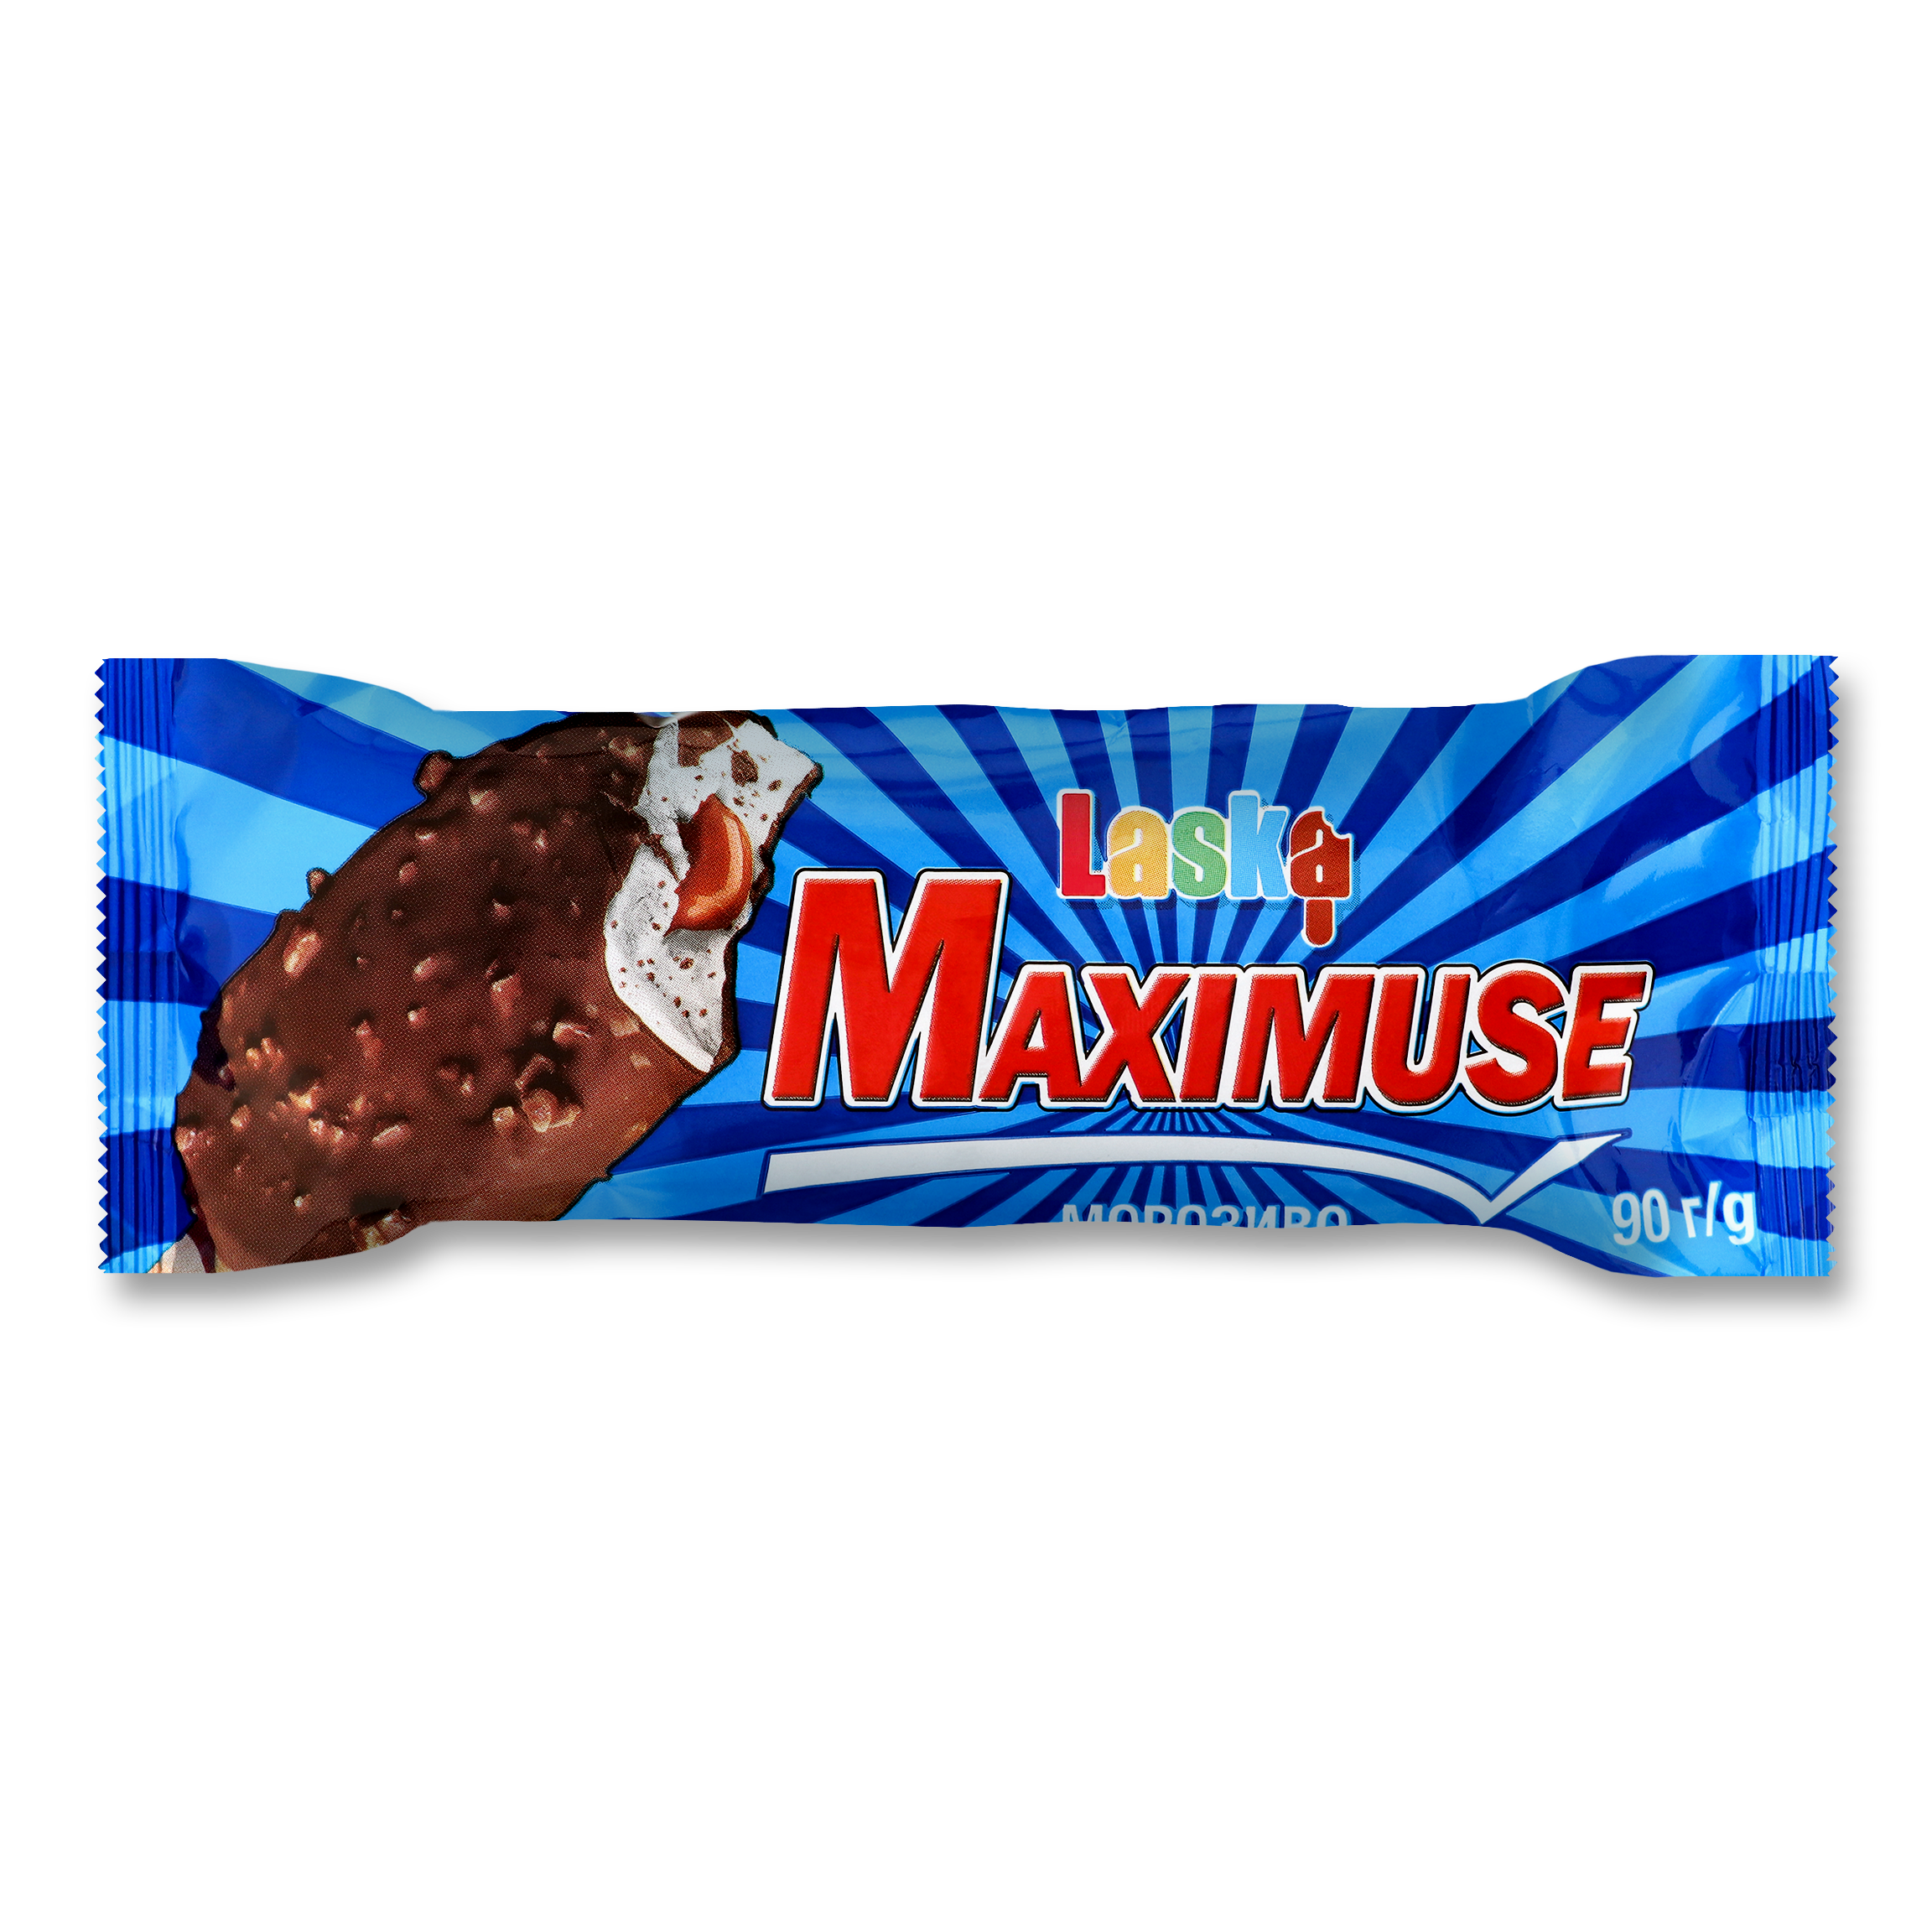 Laska Maximuse Popsicle with Caramel Filling in Glaze Ice Cream 90g